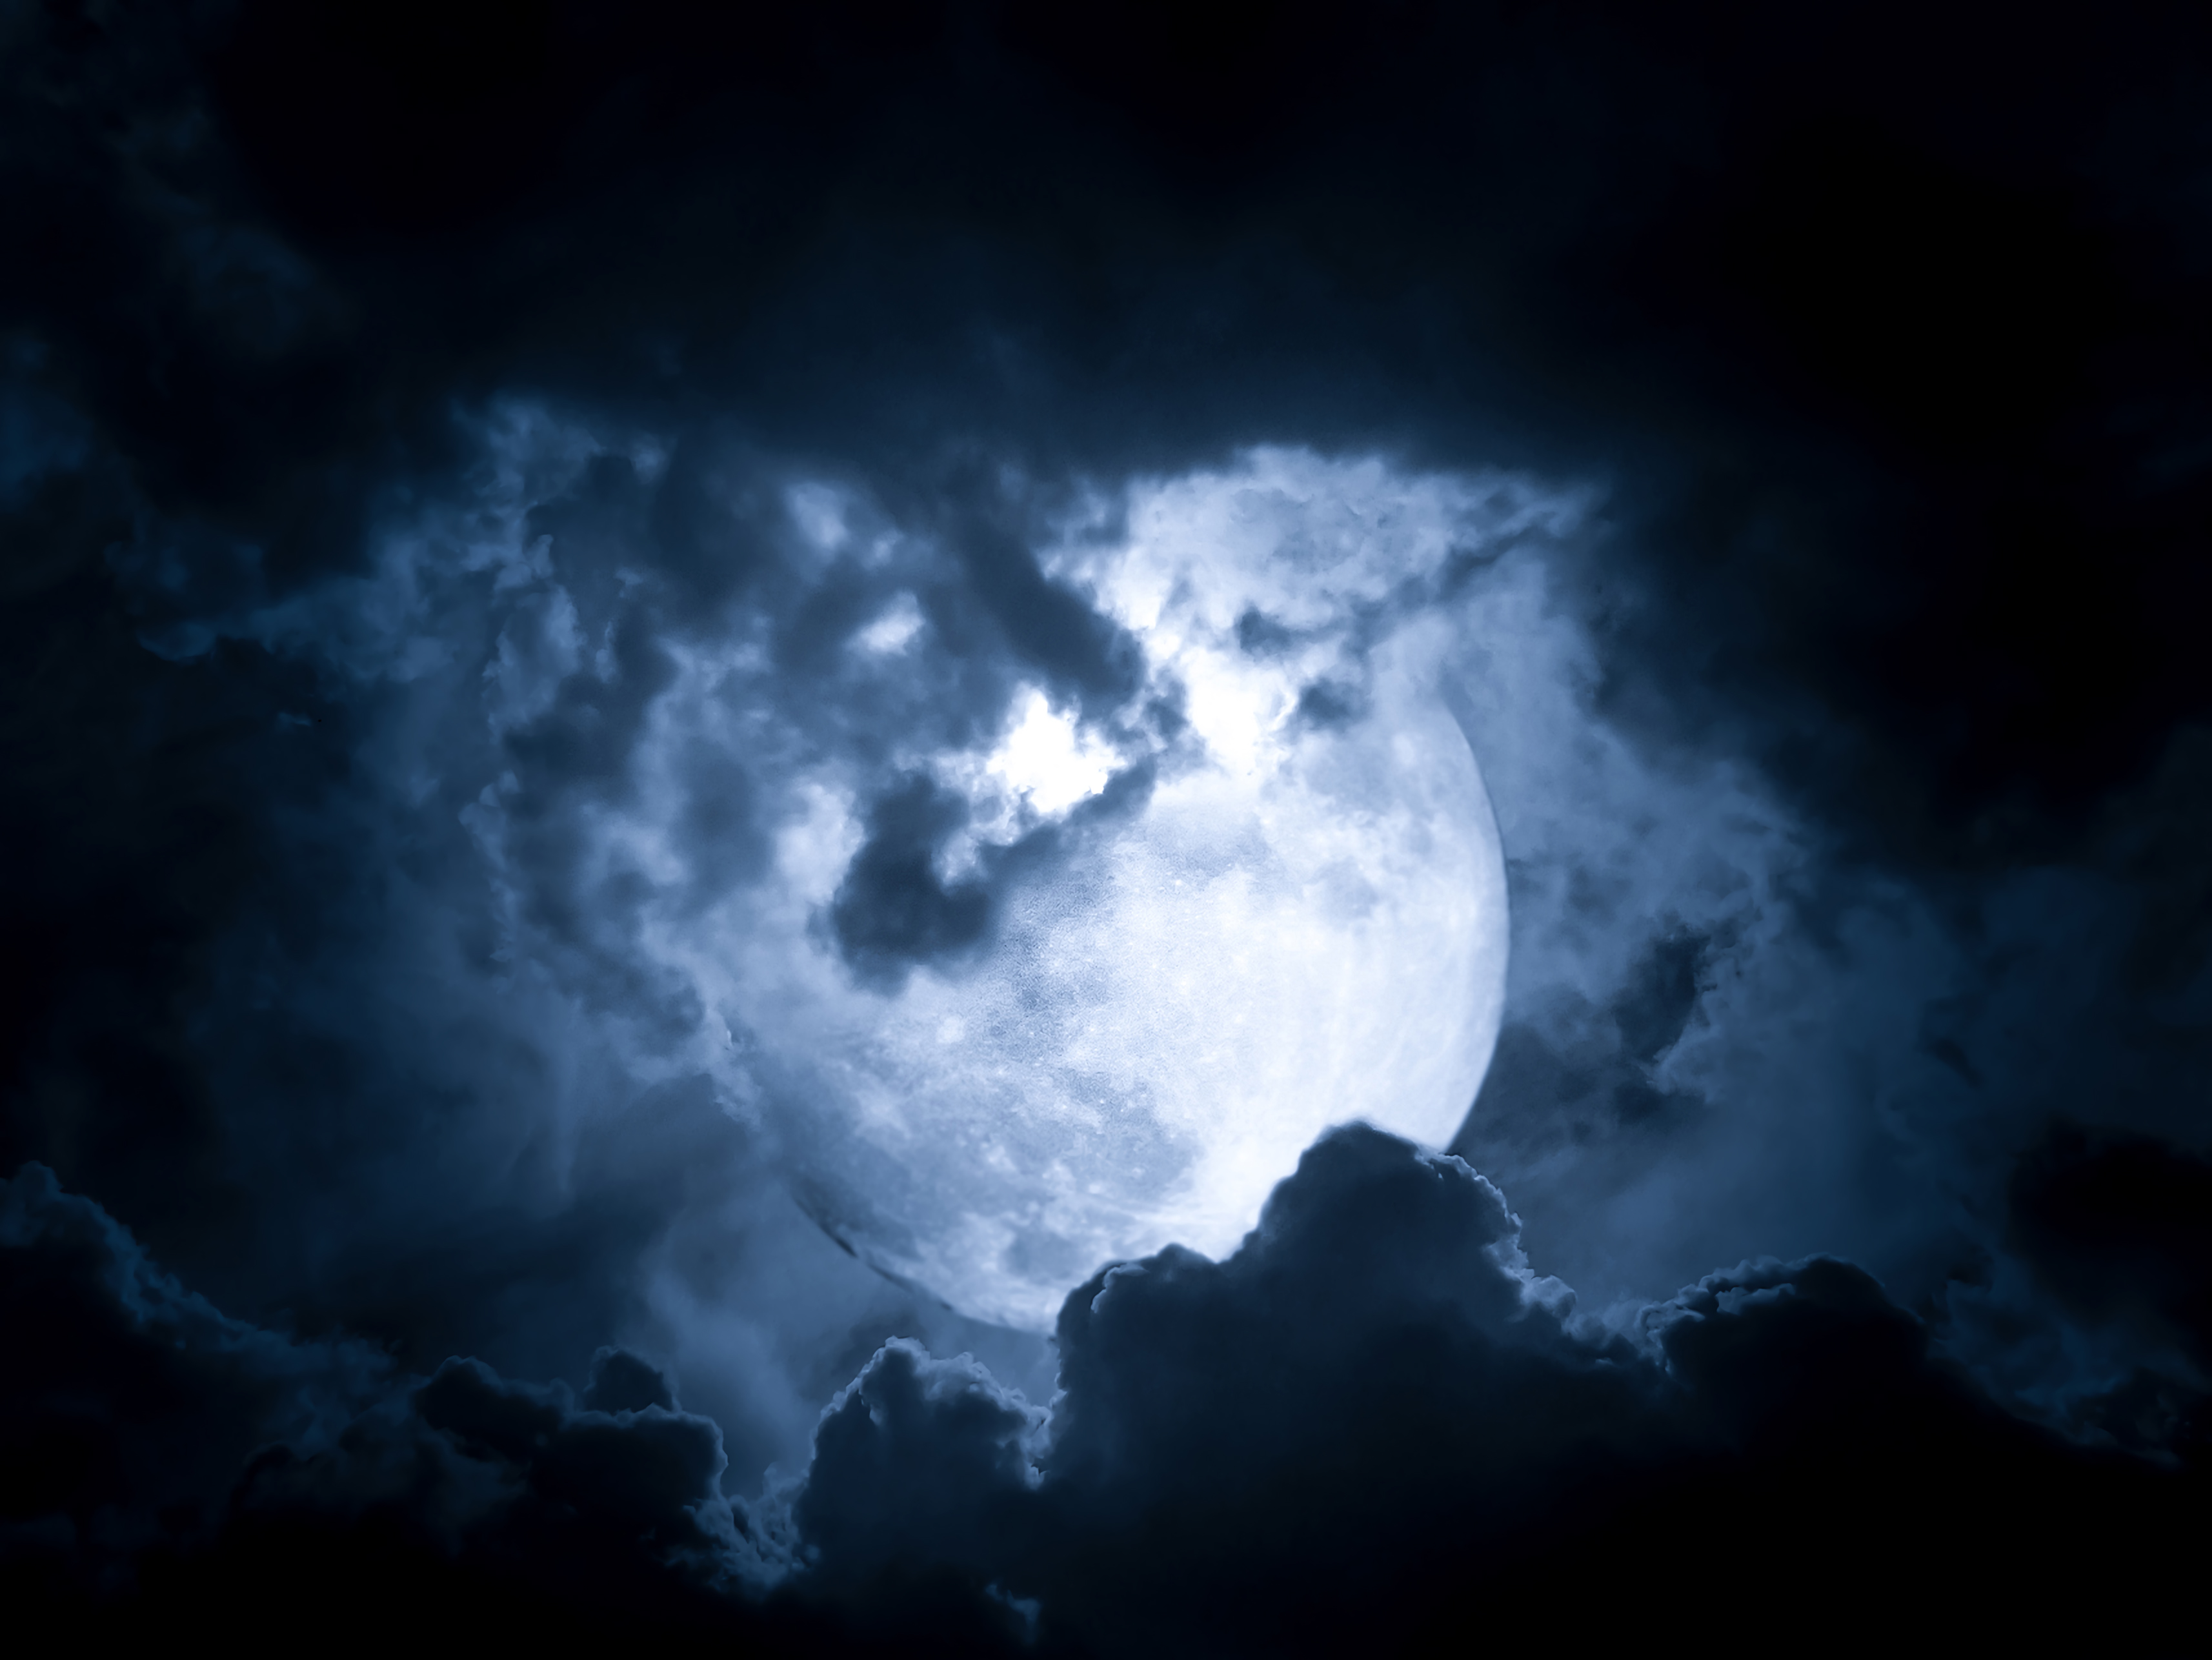 moonlight, clouds, universe, night, moon, glow wallpaper for mobile